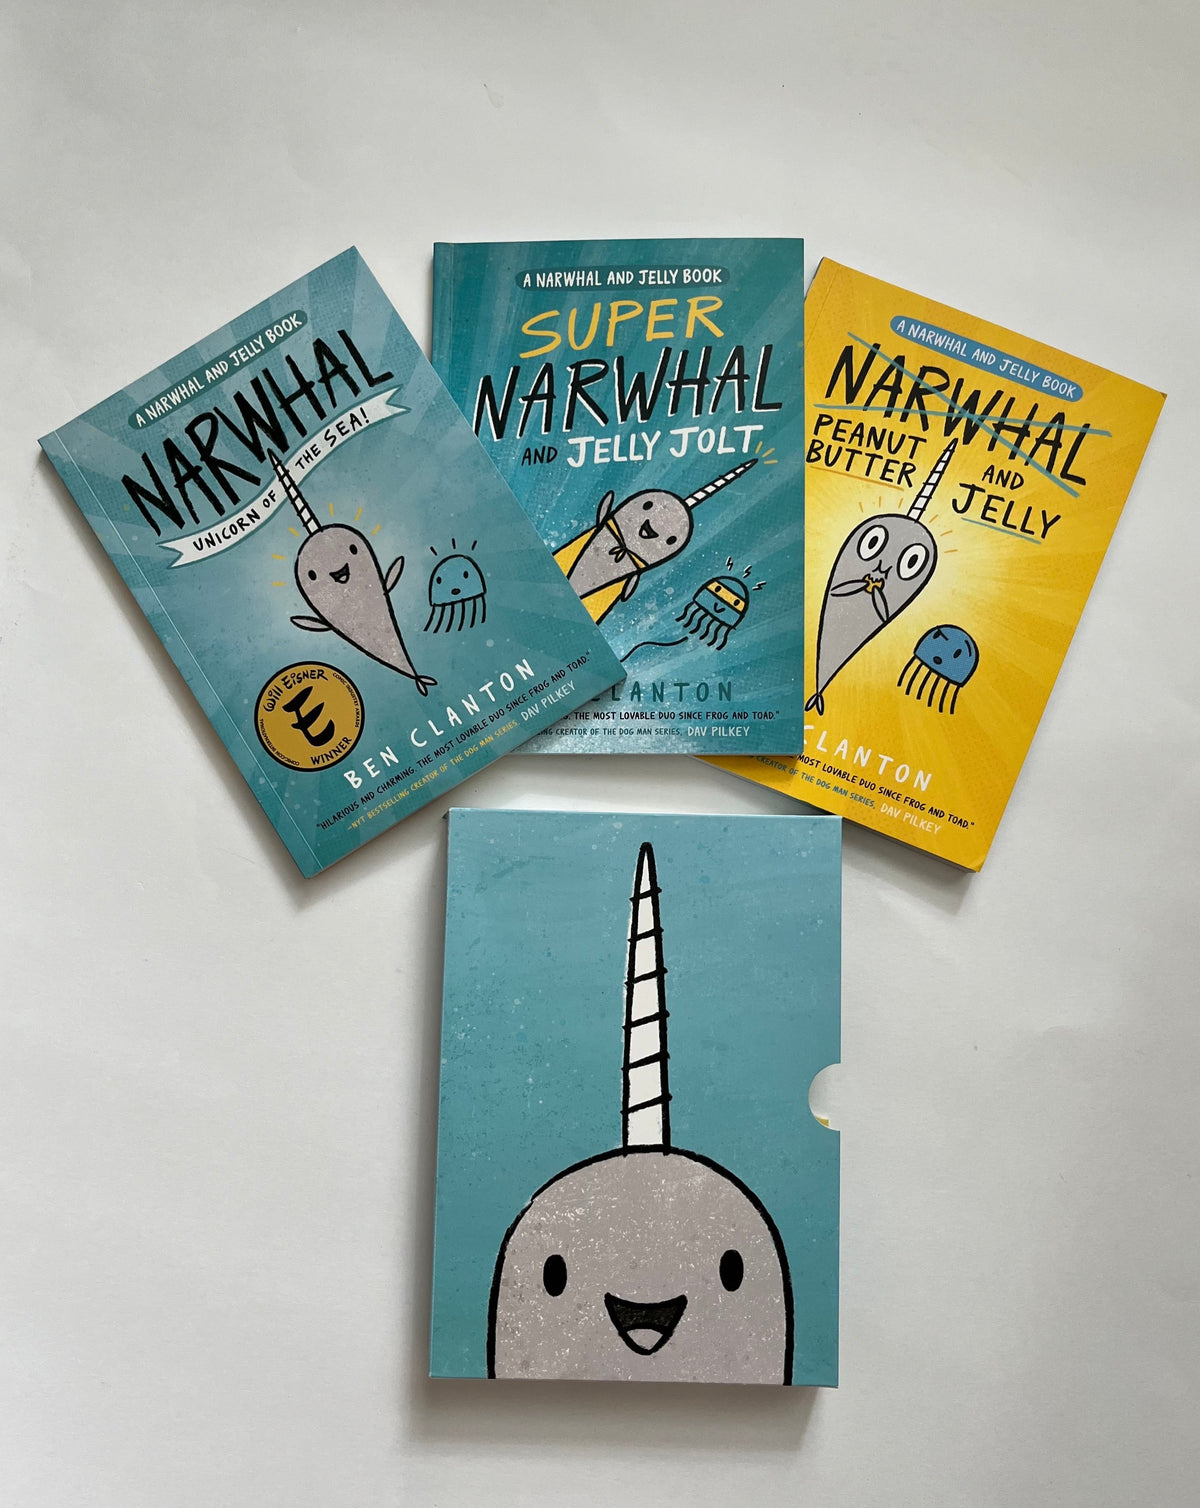 Narwhal and Jelly 3-Pack by Ben Clanton